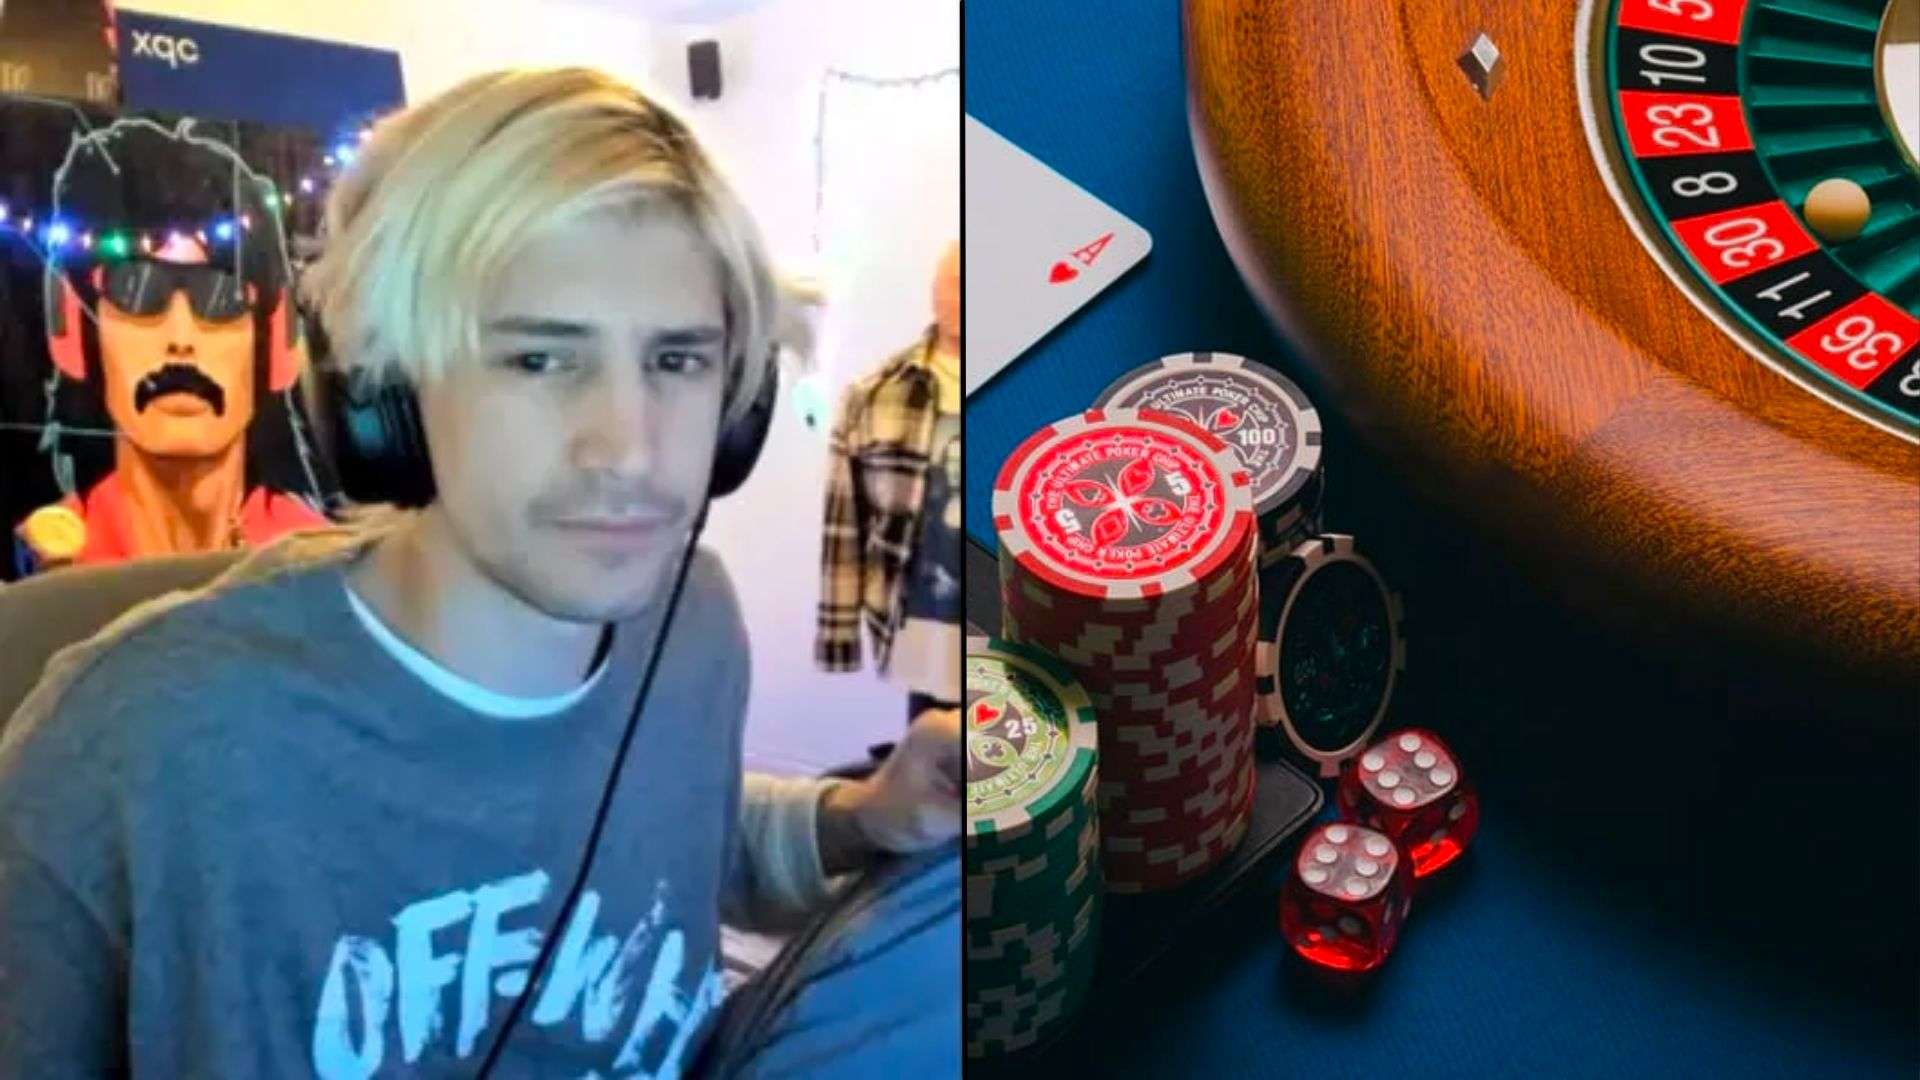 xQc in off-white shirt side-by-side with roulette wheel and gambling chips